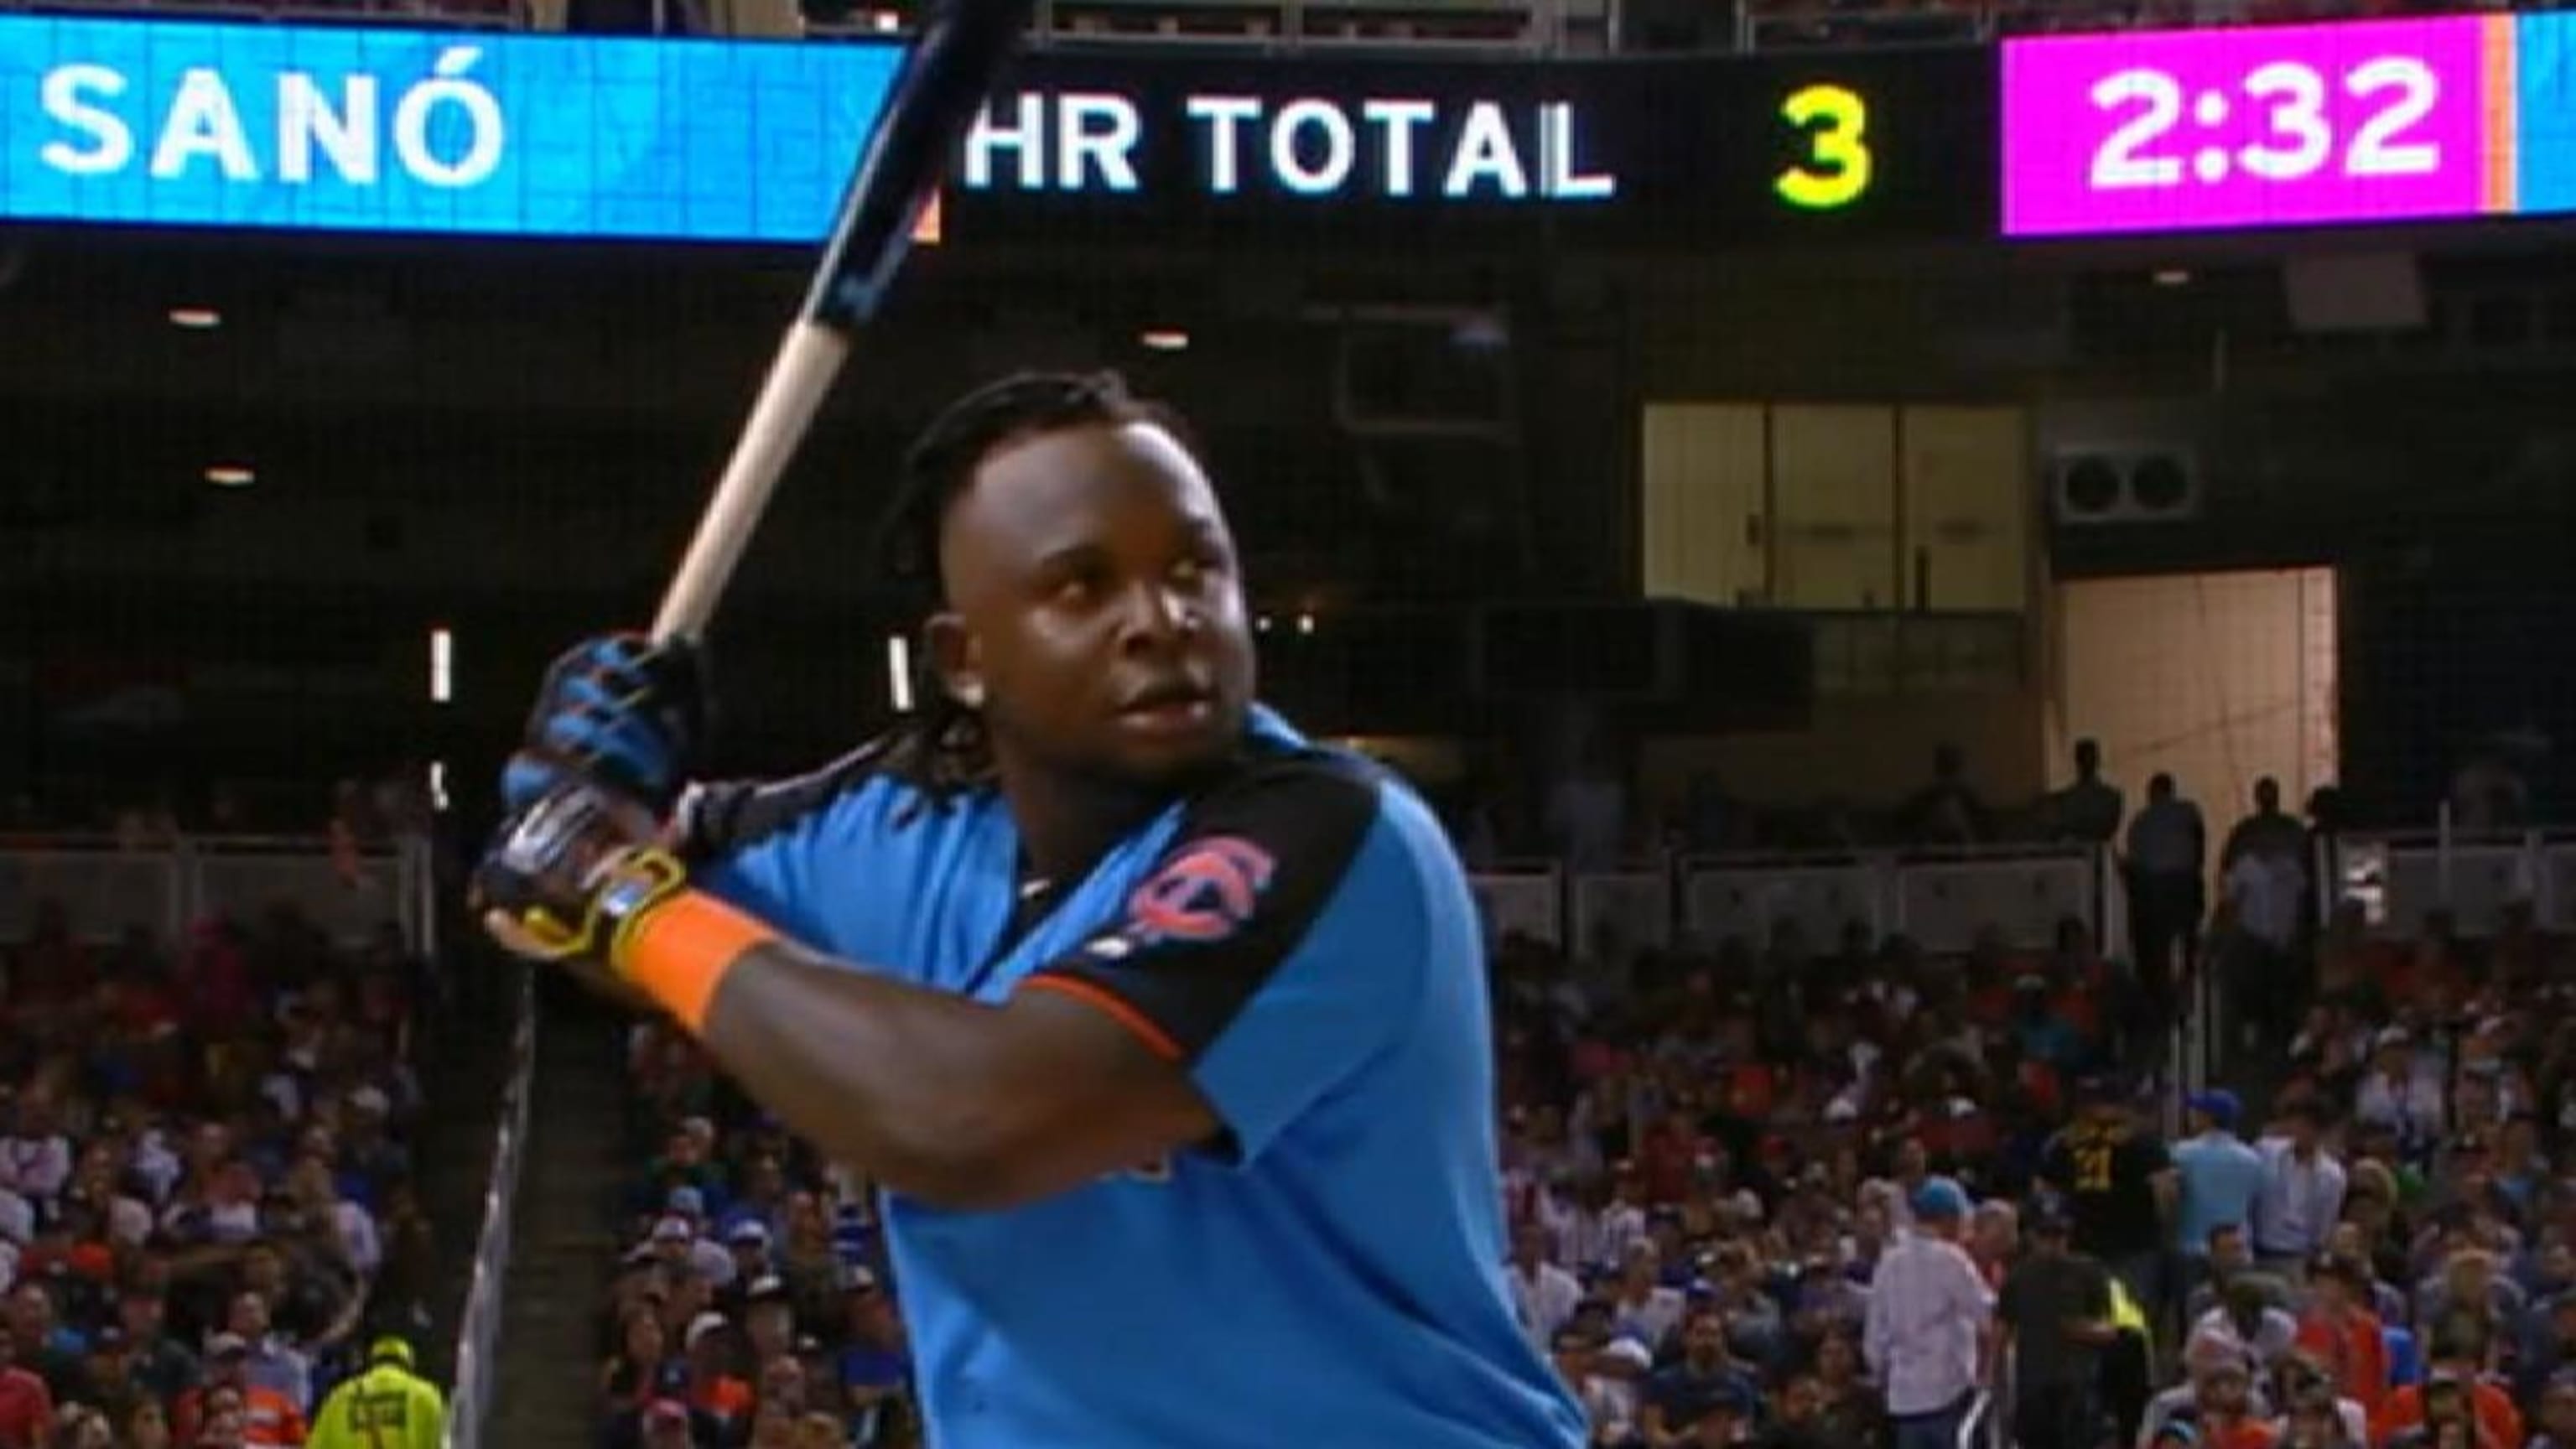 He's a Meathead in This Home Run Derby Capacity - MLB Analyst